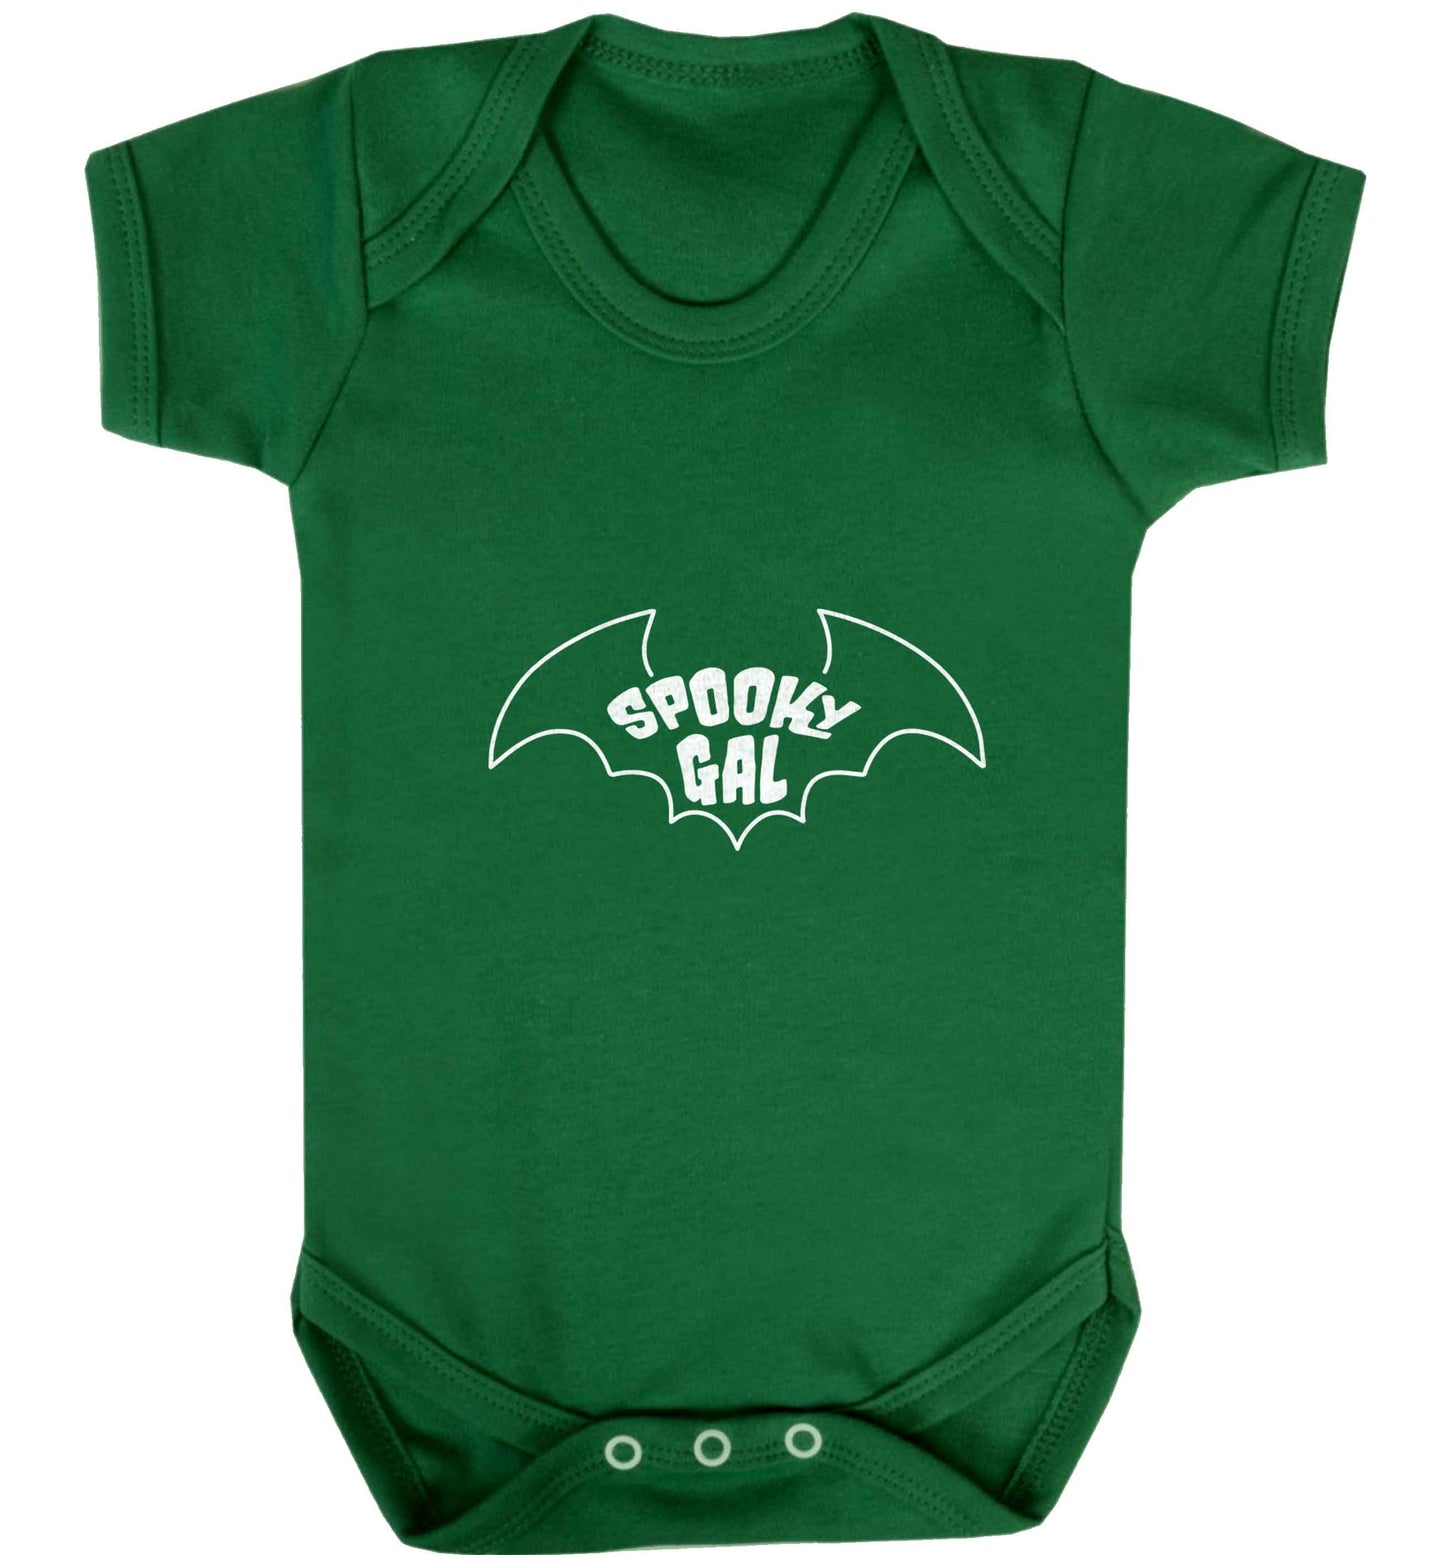 Spooky gal Kit baby vest green 18-24 months